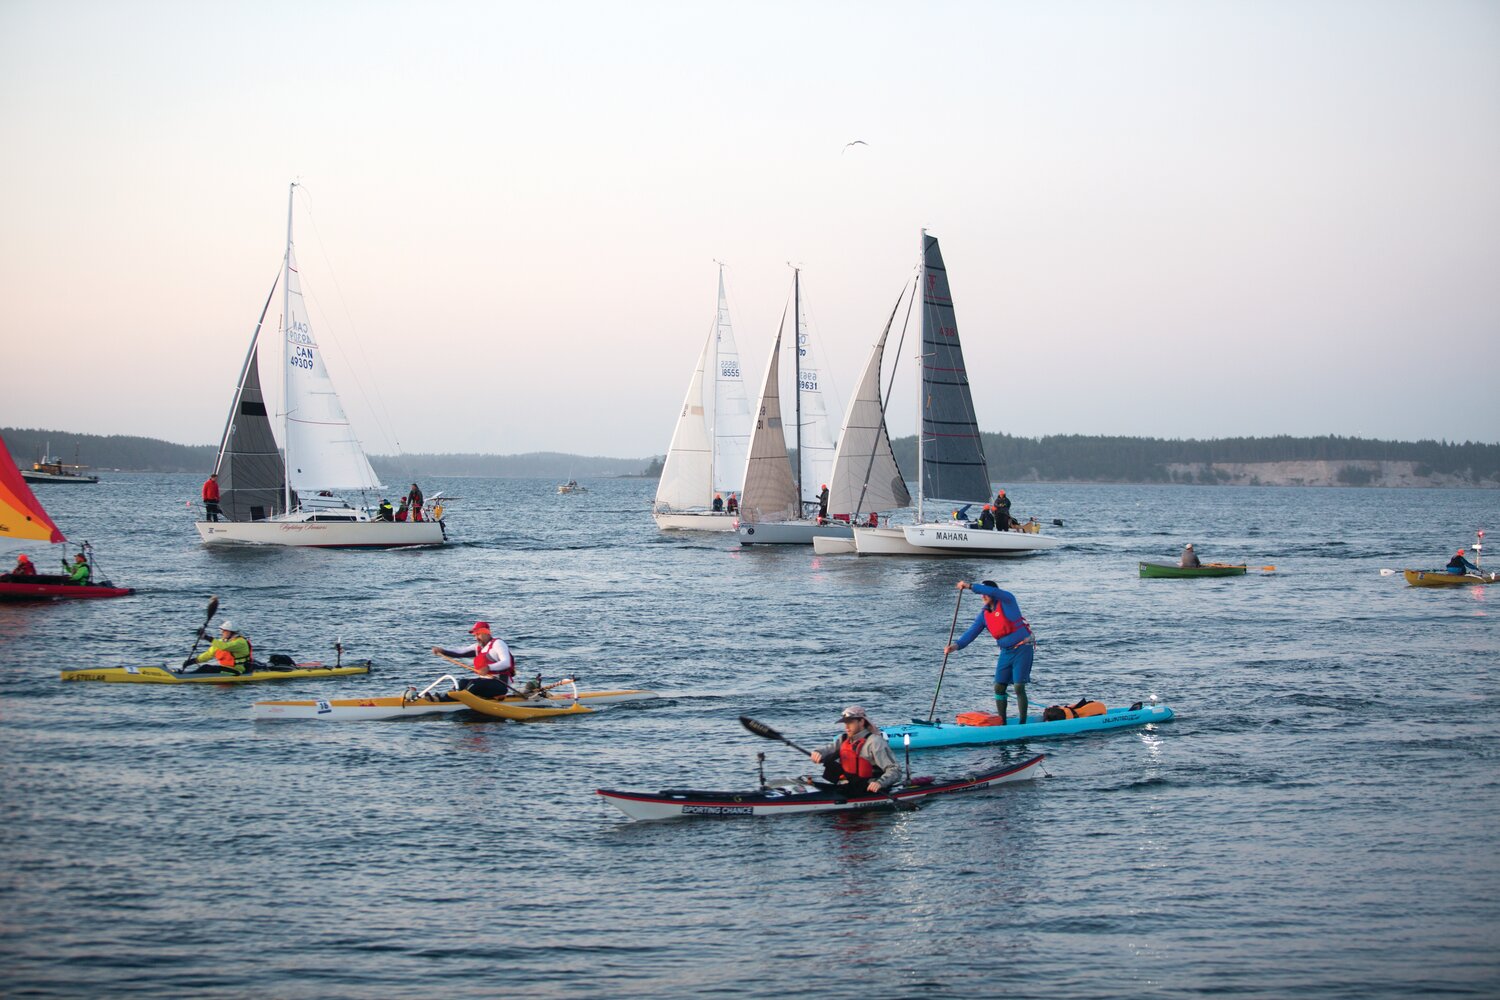 Sailors and rowers and paddlers left Port Townsend Bay early Monday morning on their quest for adventure and glory.